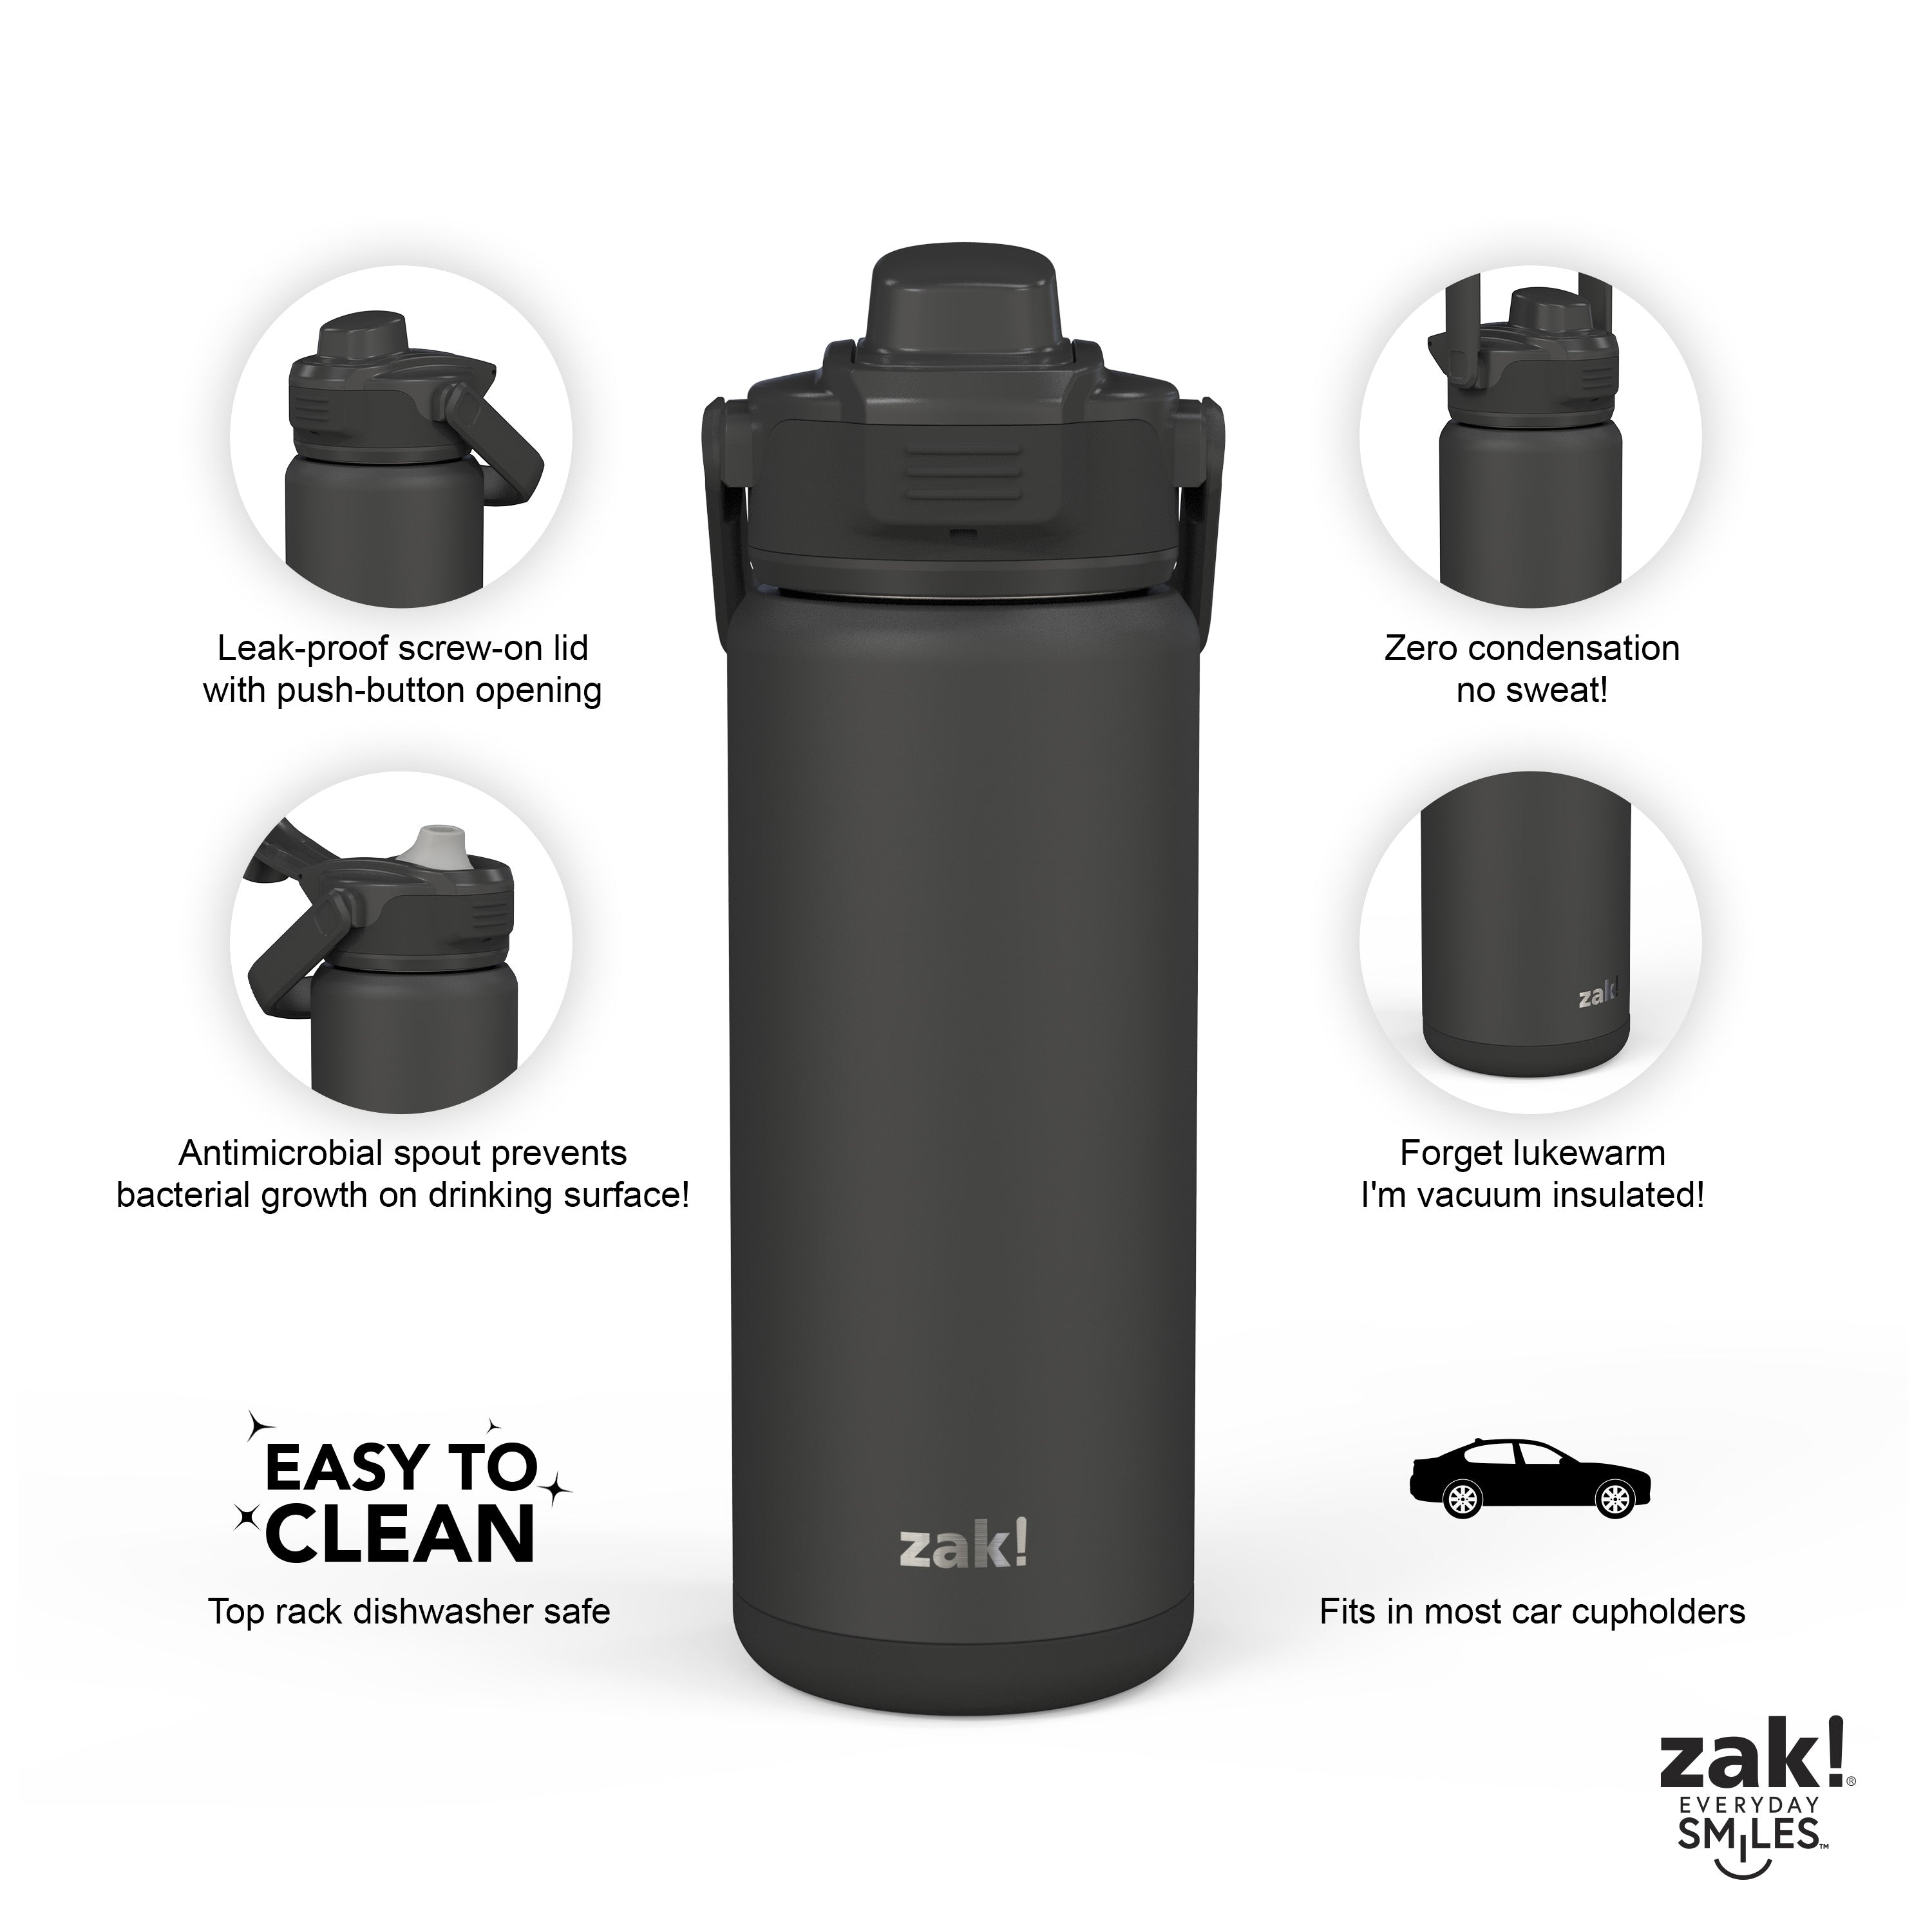 20 oz Kids' Hydro Flask Insulated Stainless Steel Water Bottle